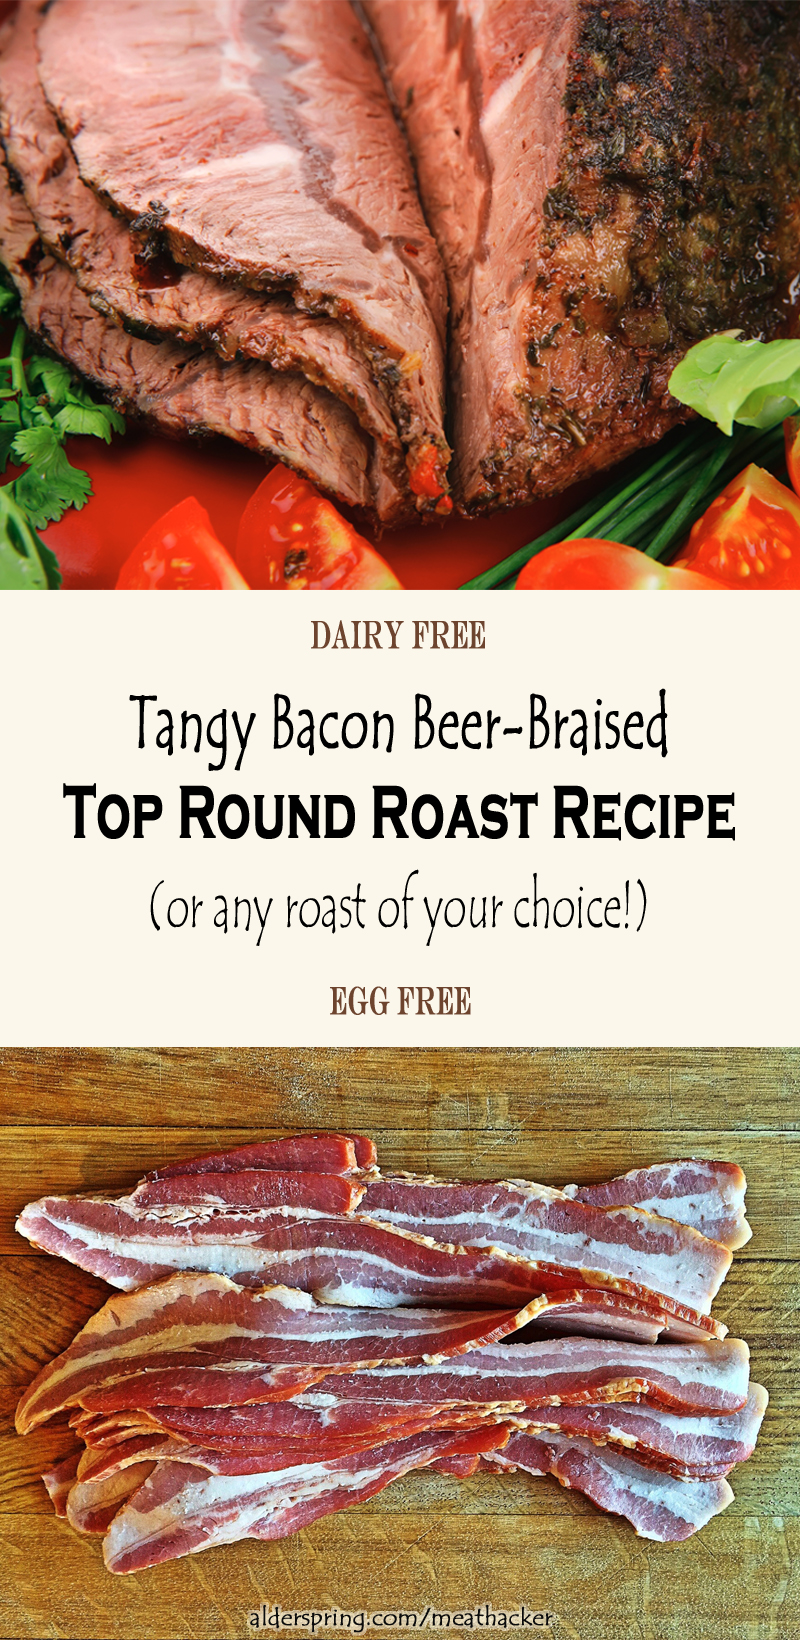 Tangy Bacon Beer-Braised Top Round Roast Recipe